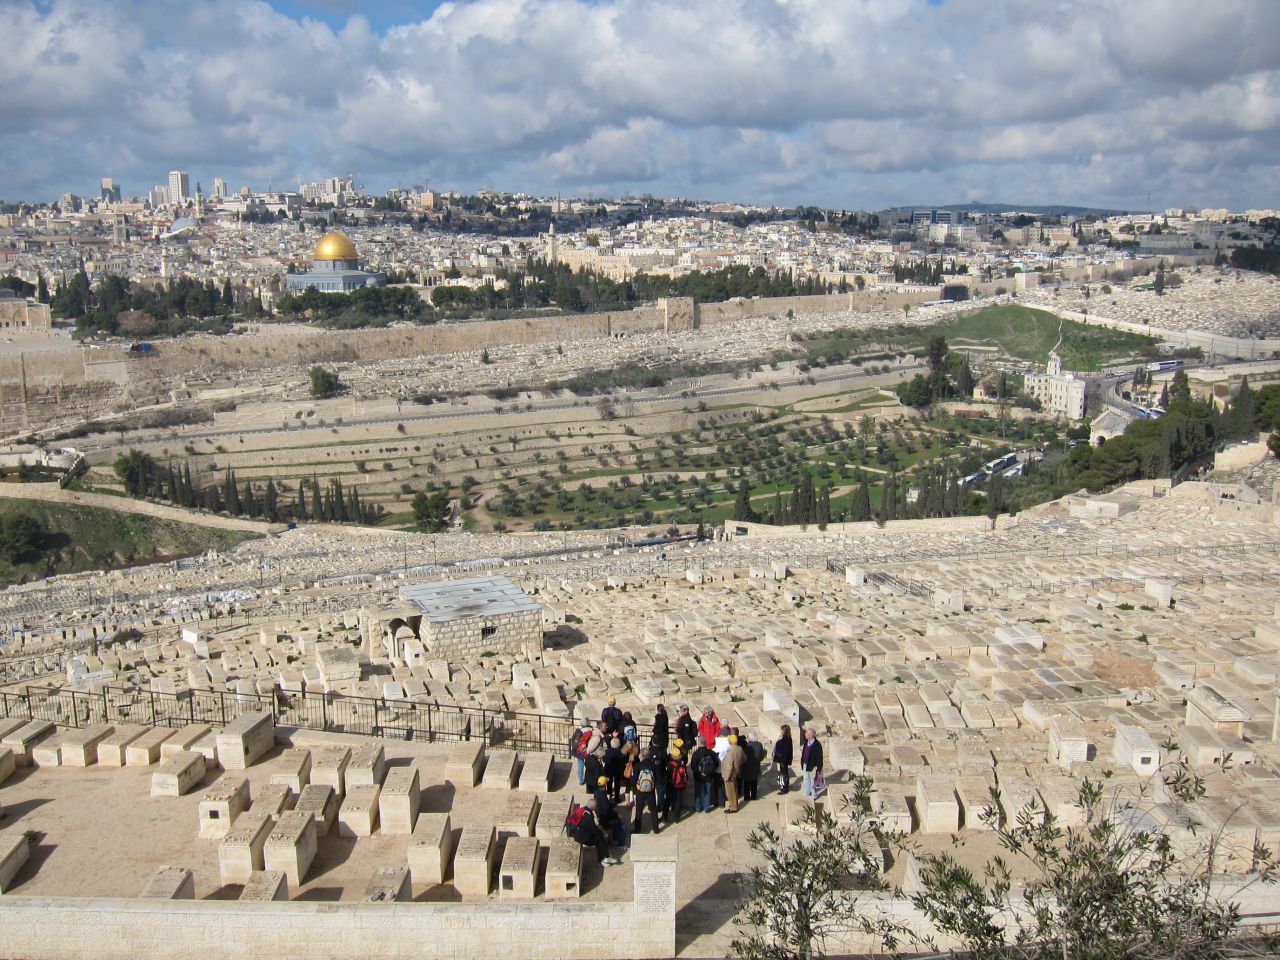 The Jewish cemetery contains Biblical kings and modern Israeli leaders such as Menahem Begin. There are also Christian and Muslim burial grounds here. 